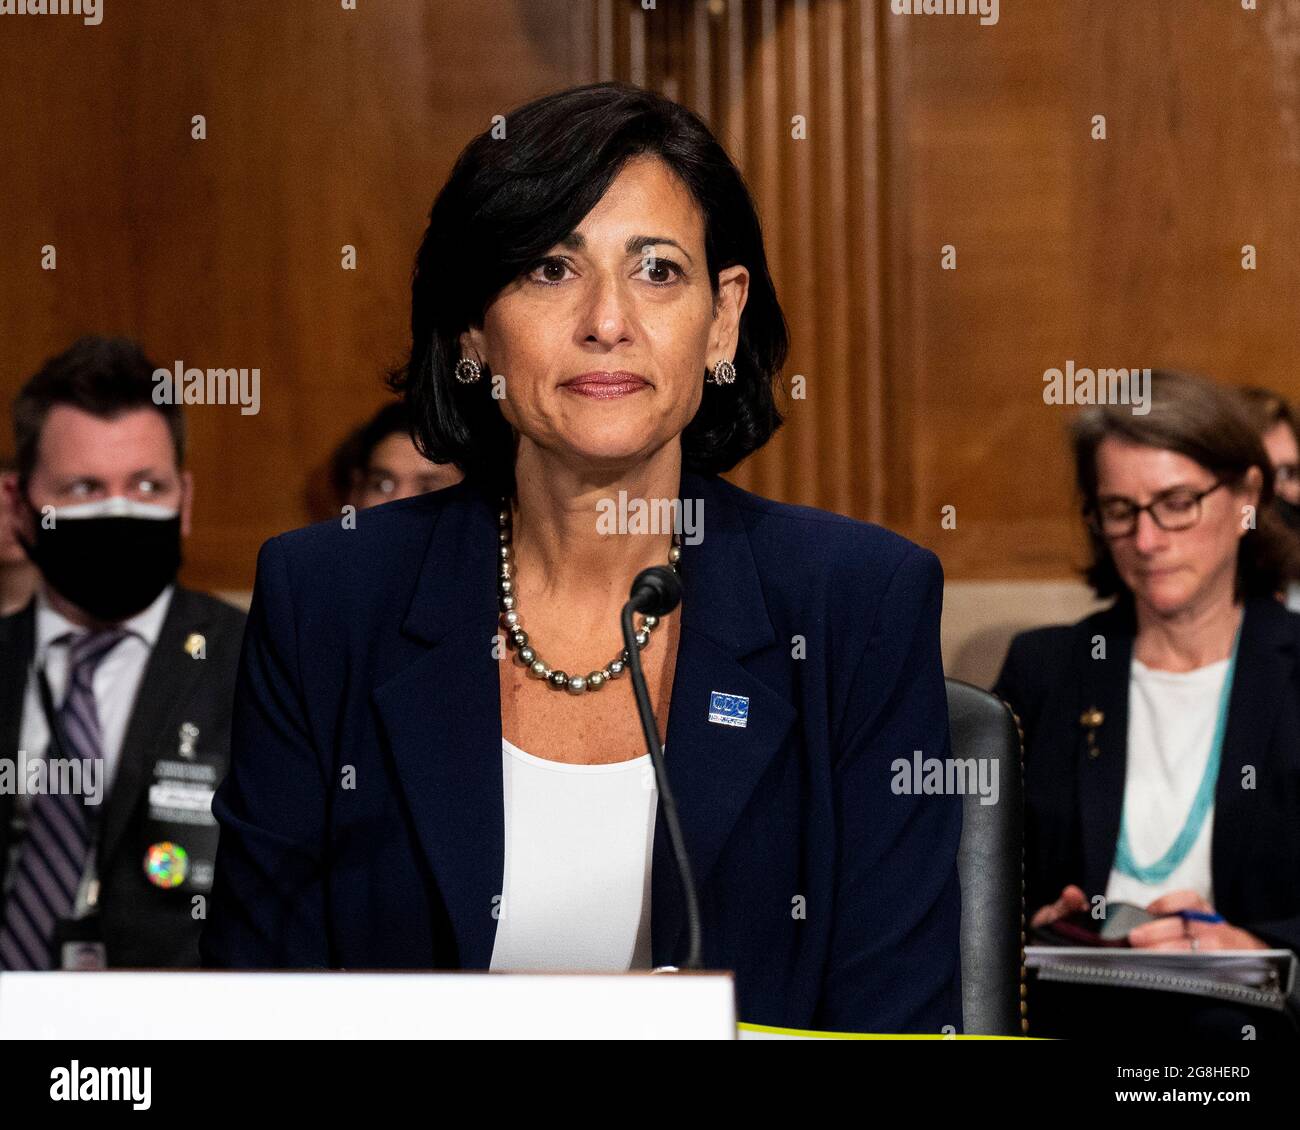 Washington, DC, USA. 20th July, 2021. July 20, 2021 - Washington, DC, United States: Dr. ROCHELLE WALENSKY, Director of the Centers for Disease Control and Prevention, at a hearing of the Senate Health, Education, Labor, and Pensions Committee. (Credit Image: © Michael Brochstein/ZUMA Press Wire) Stock Photo